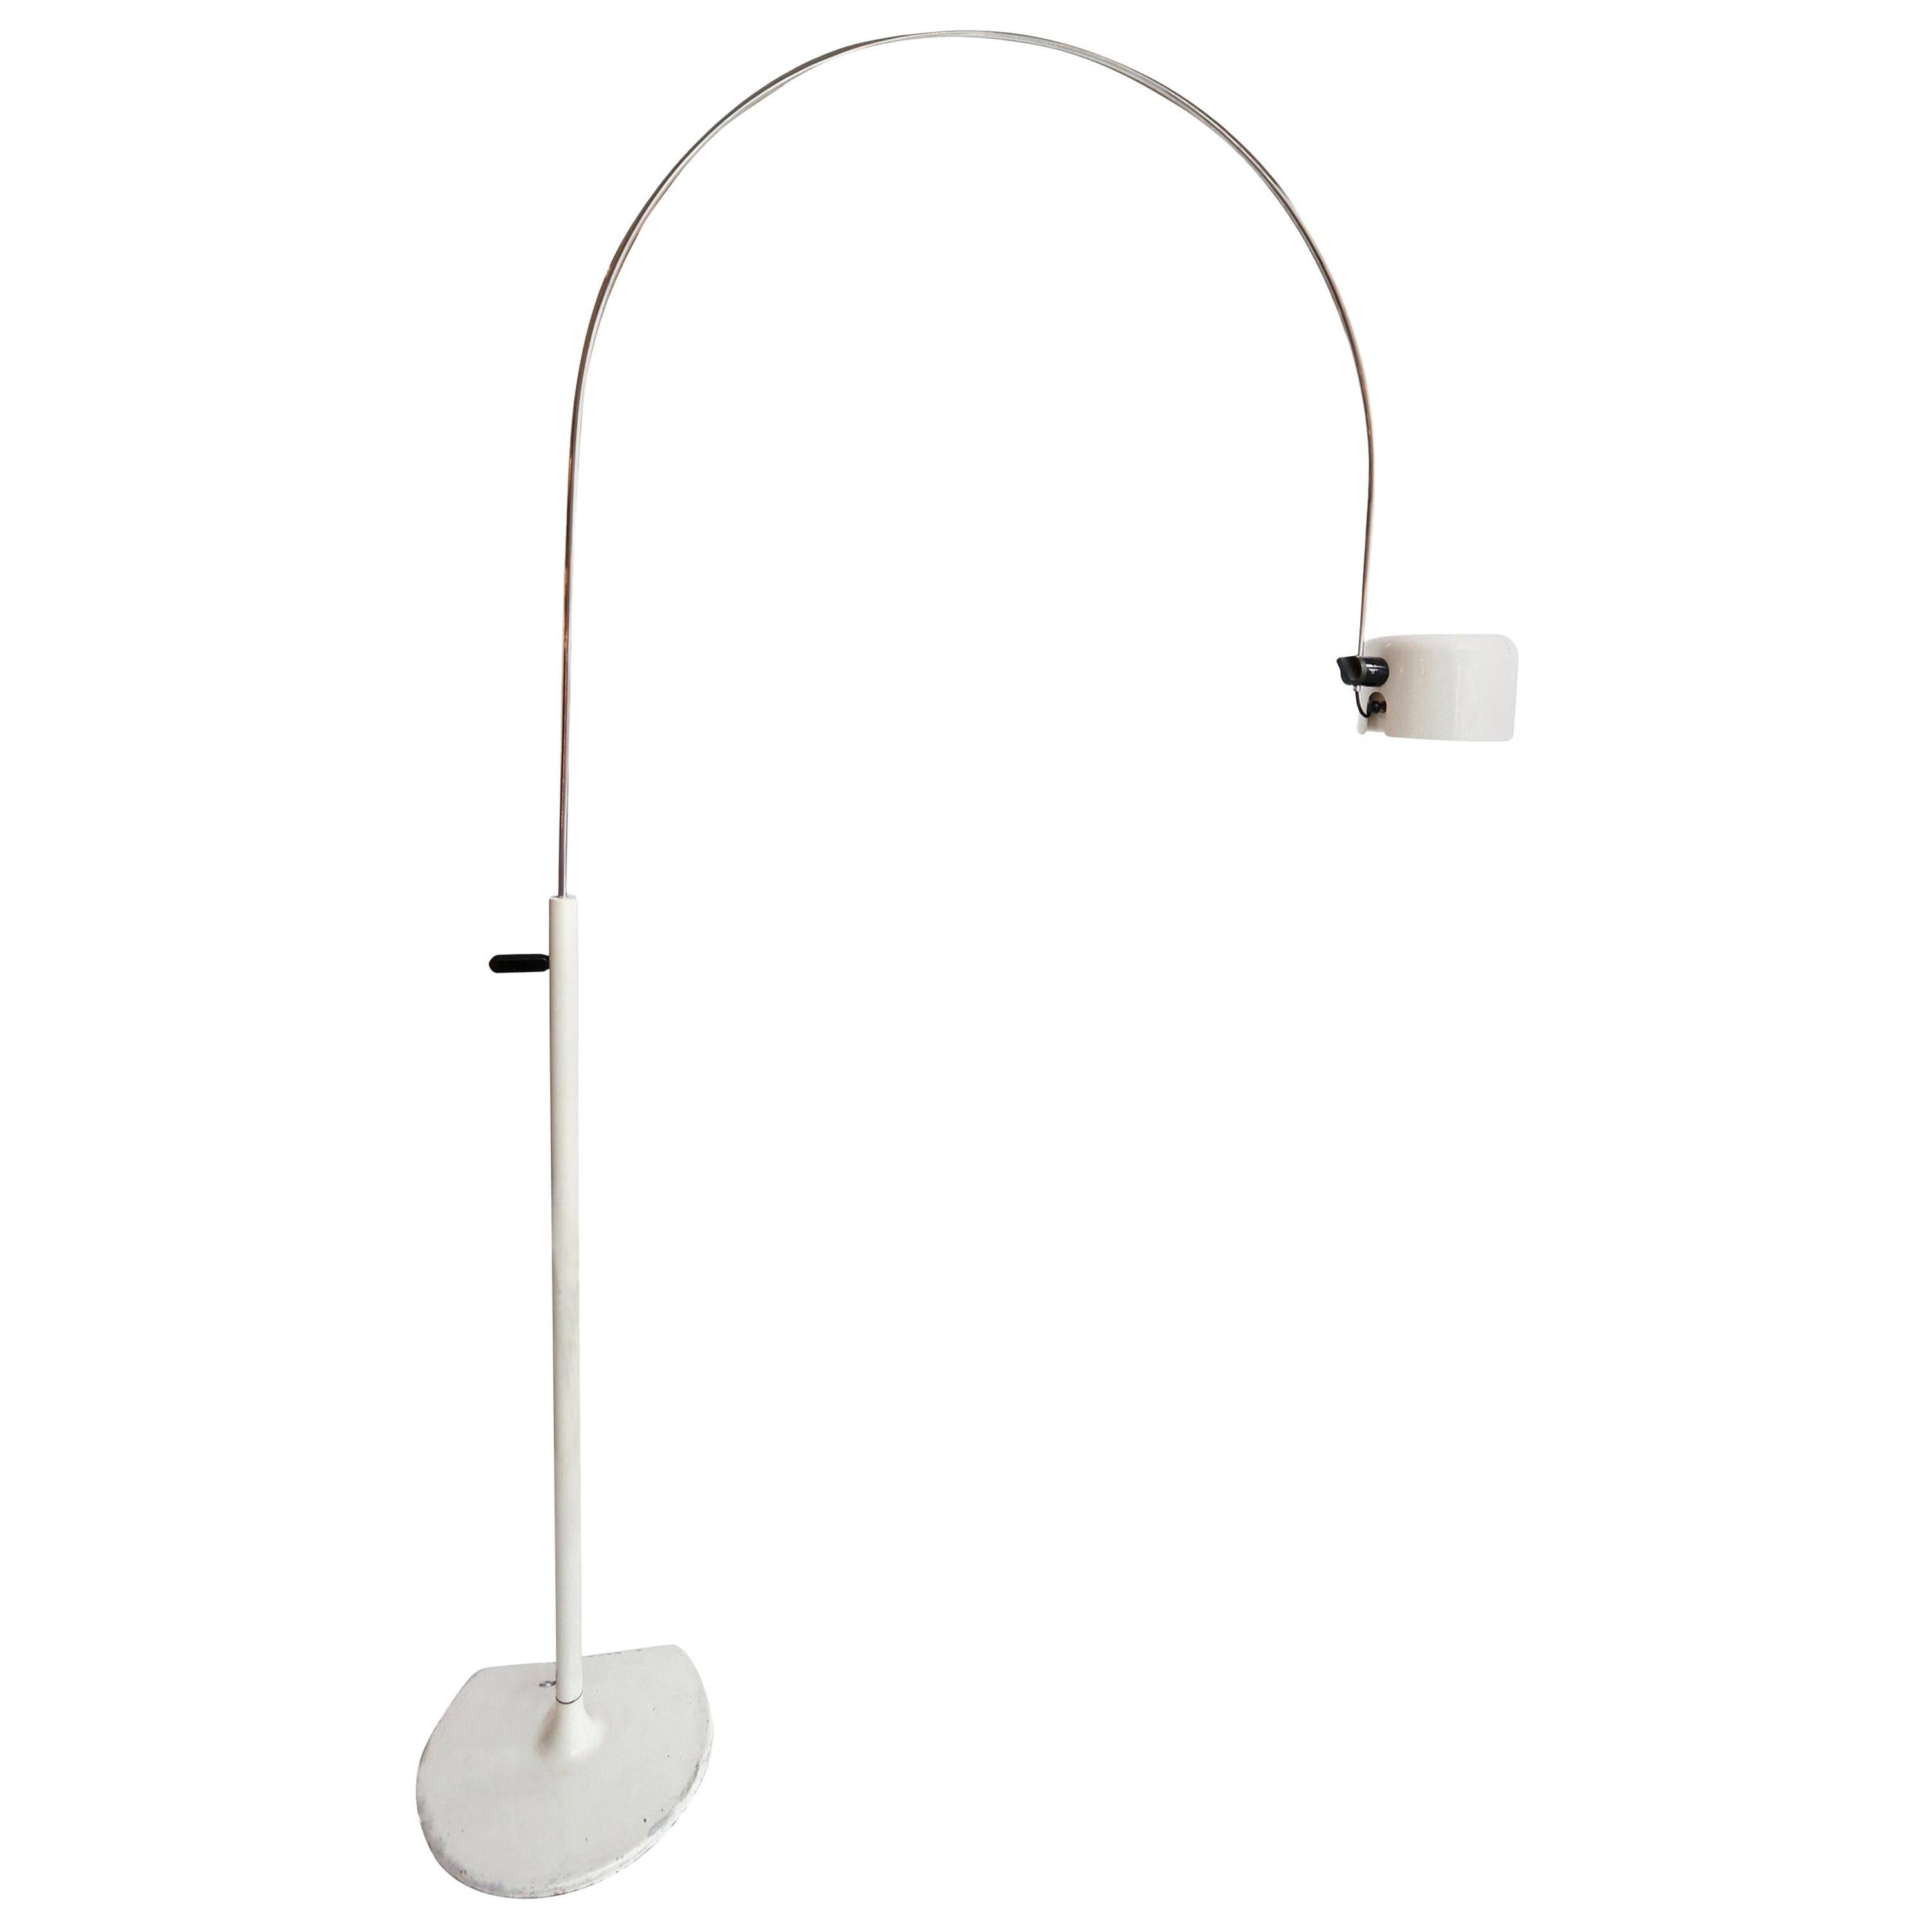 Joe Colombo White Metal Floor Lamp with Arched Shade, 1970s